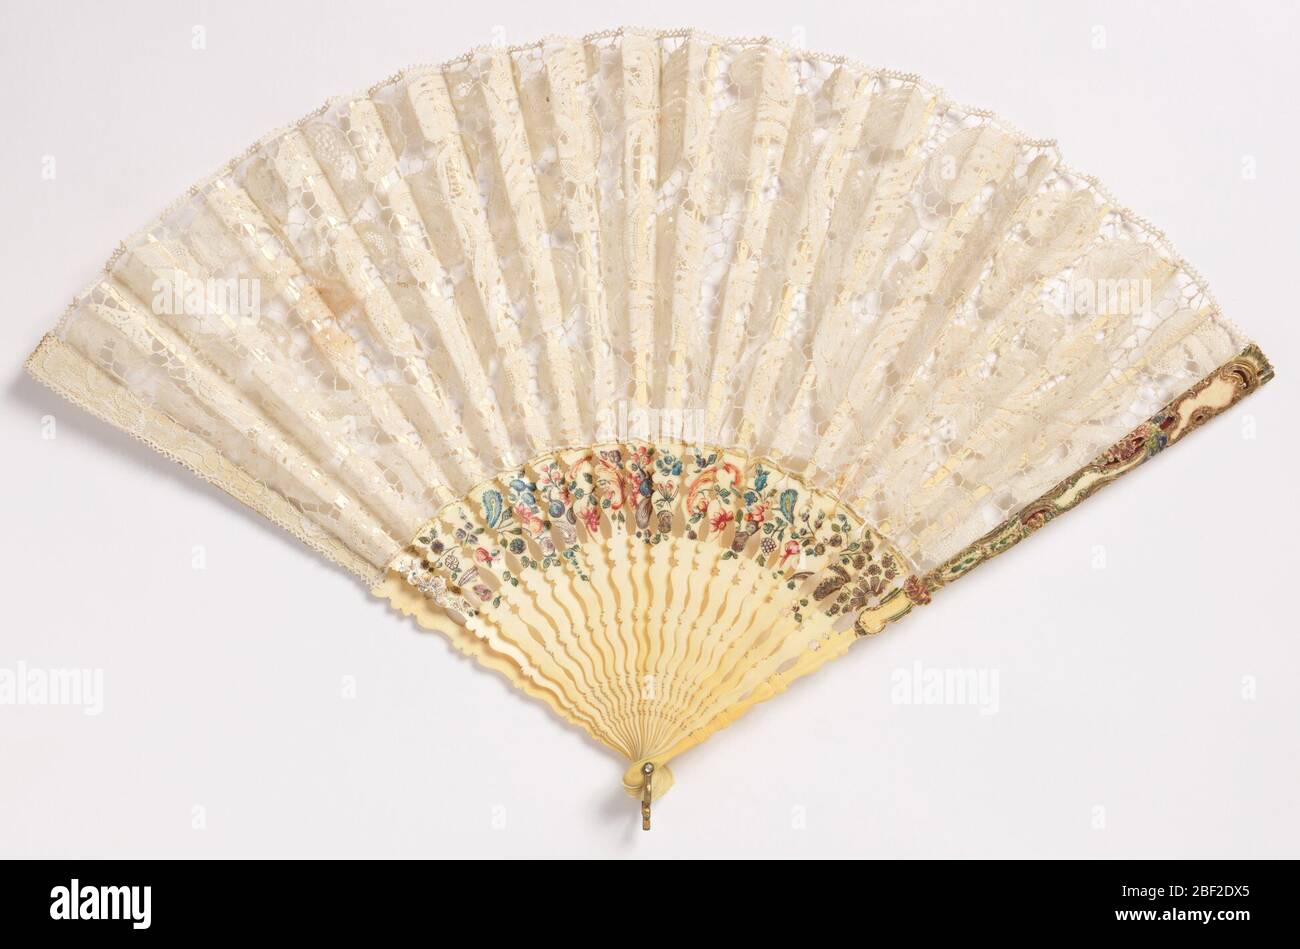 Pleated fan. Pleated fan. Leaf of 17th century white Milanese bobbin lace. Carved and painted ivory sticks with flowers and feathers. Guards carved with baroque detail and painted. Rivet is set with faceted glass. Gilt metal bail. Stock Photo